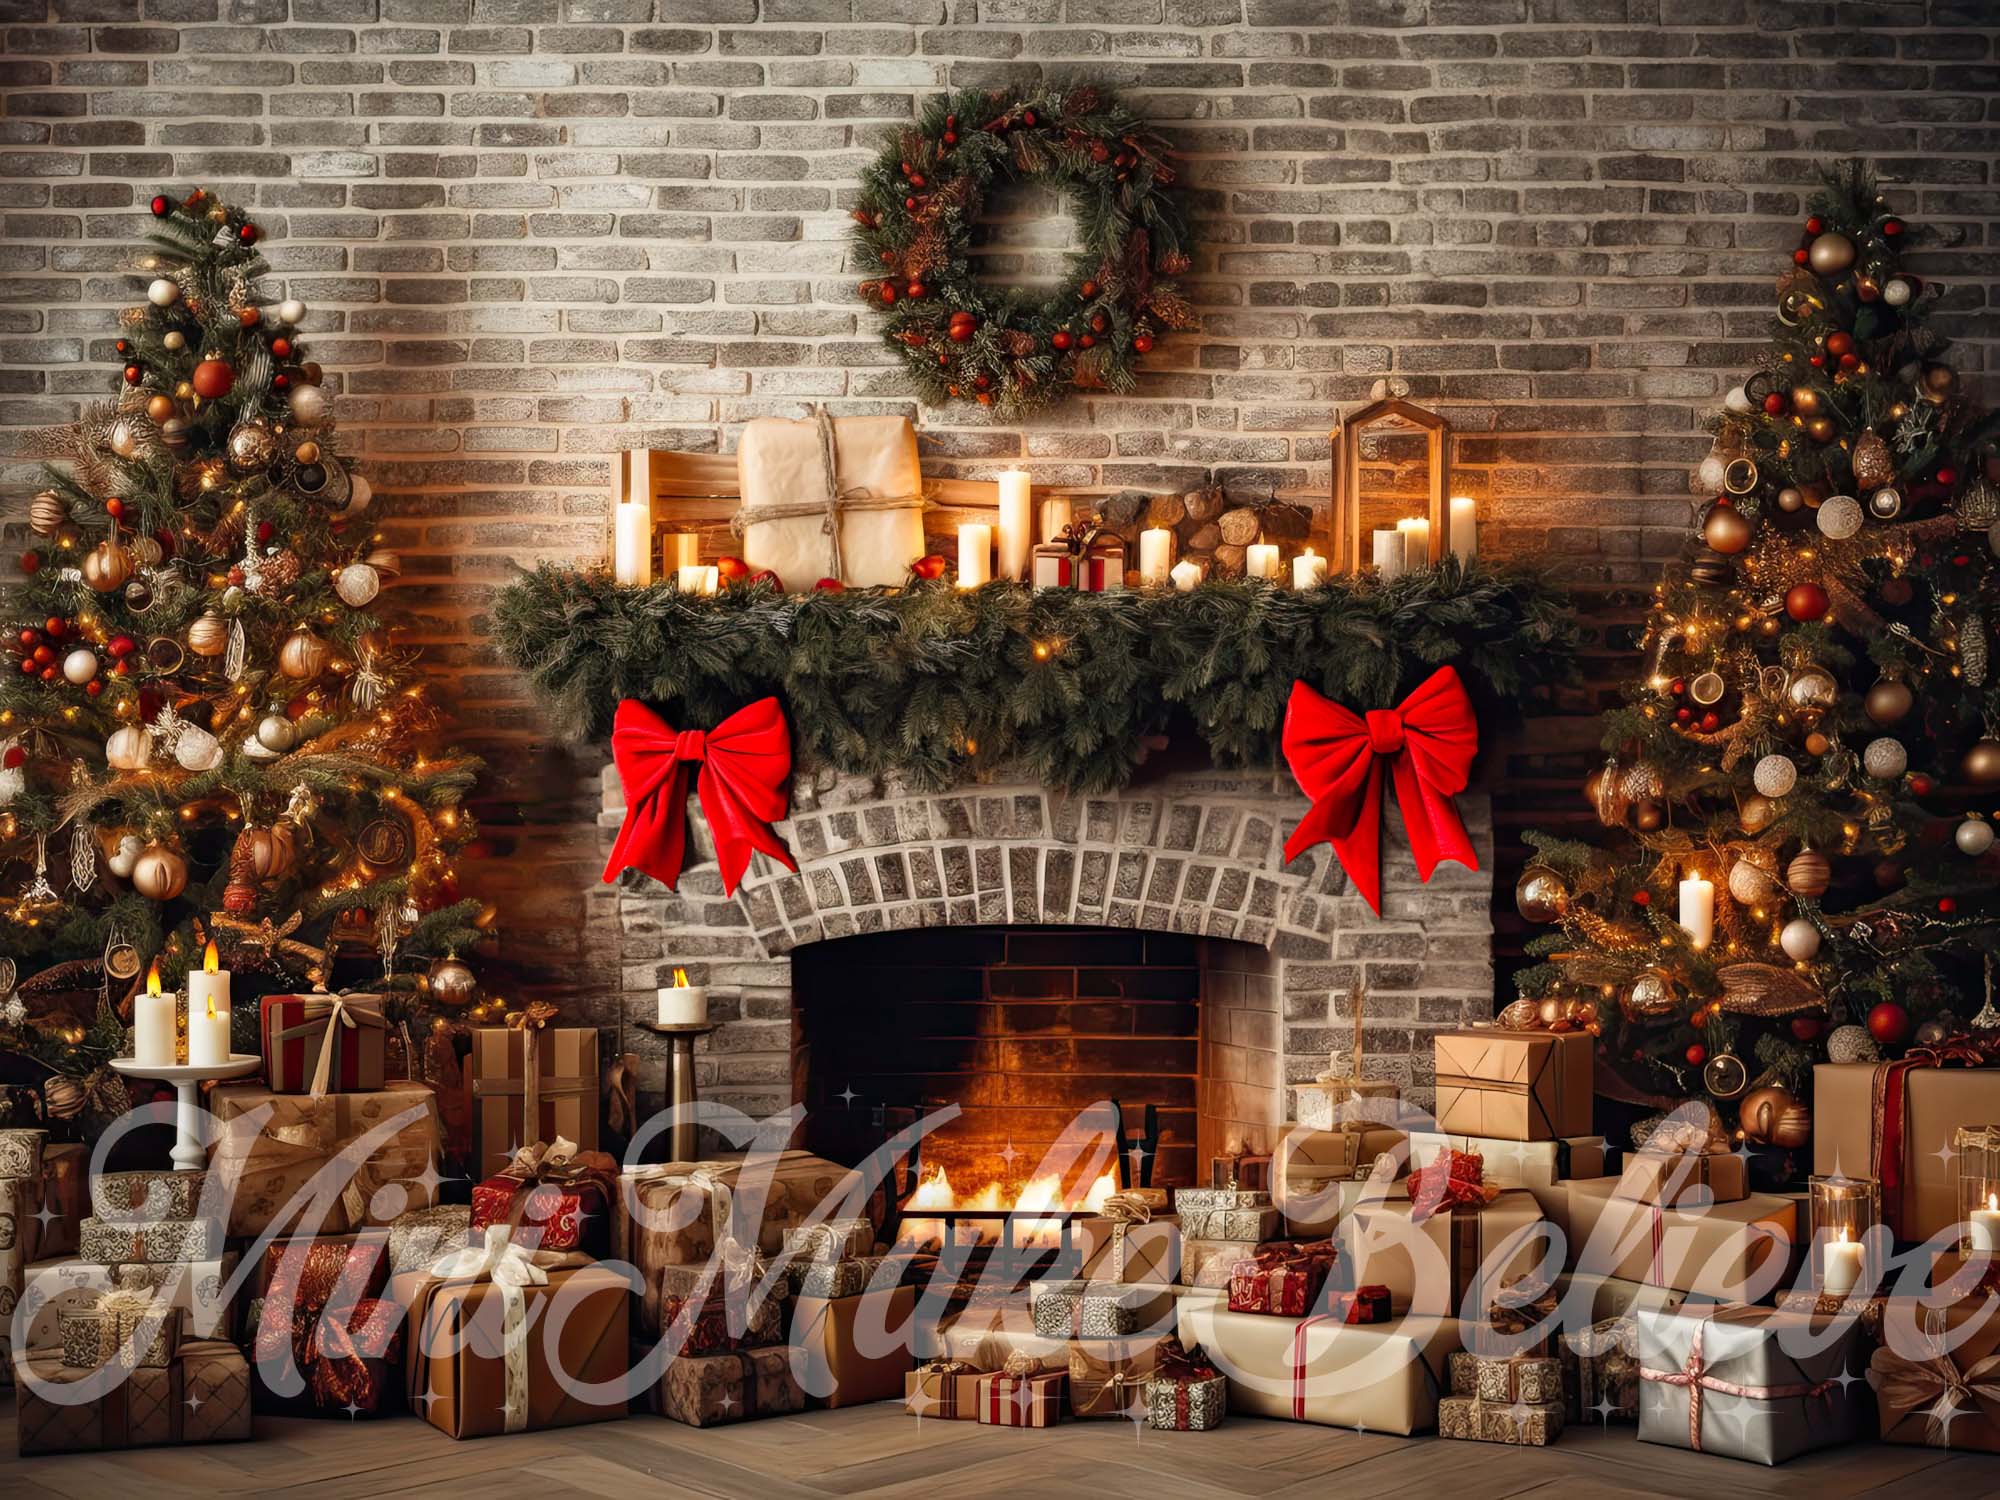 Kate Christmas Rustic Brick Fireplace and Trees Winter Backdrop Designed by Mini MakeBelieve (only ship to Canada)